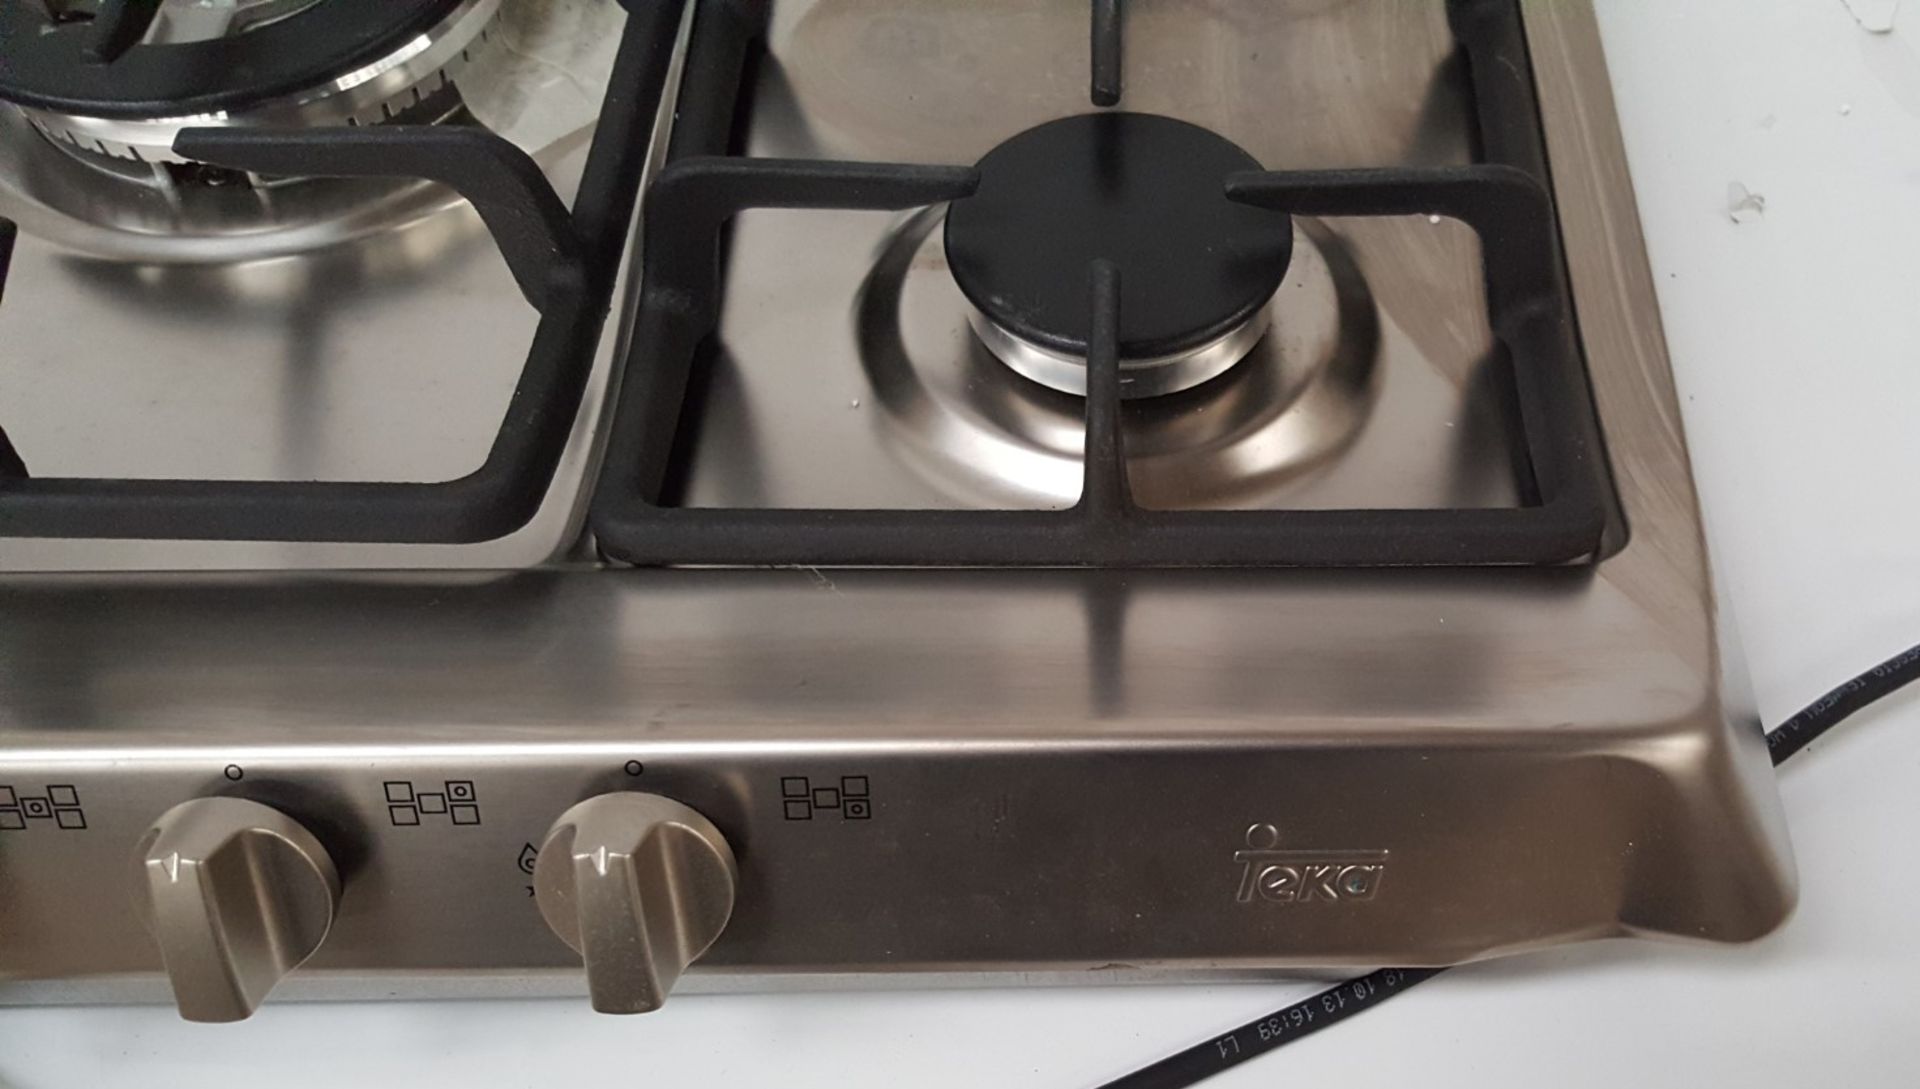 1 x TEKA 70 cm Stainless Steel Finish Gas Hob With 5 Burners - Ref BY170 - Image 4 of 5